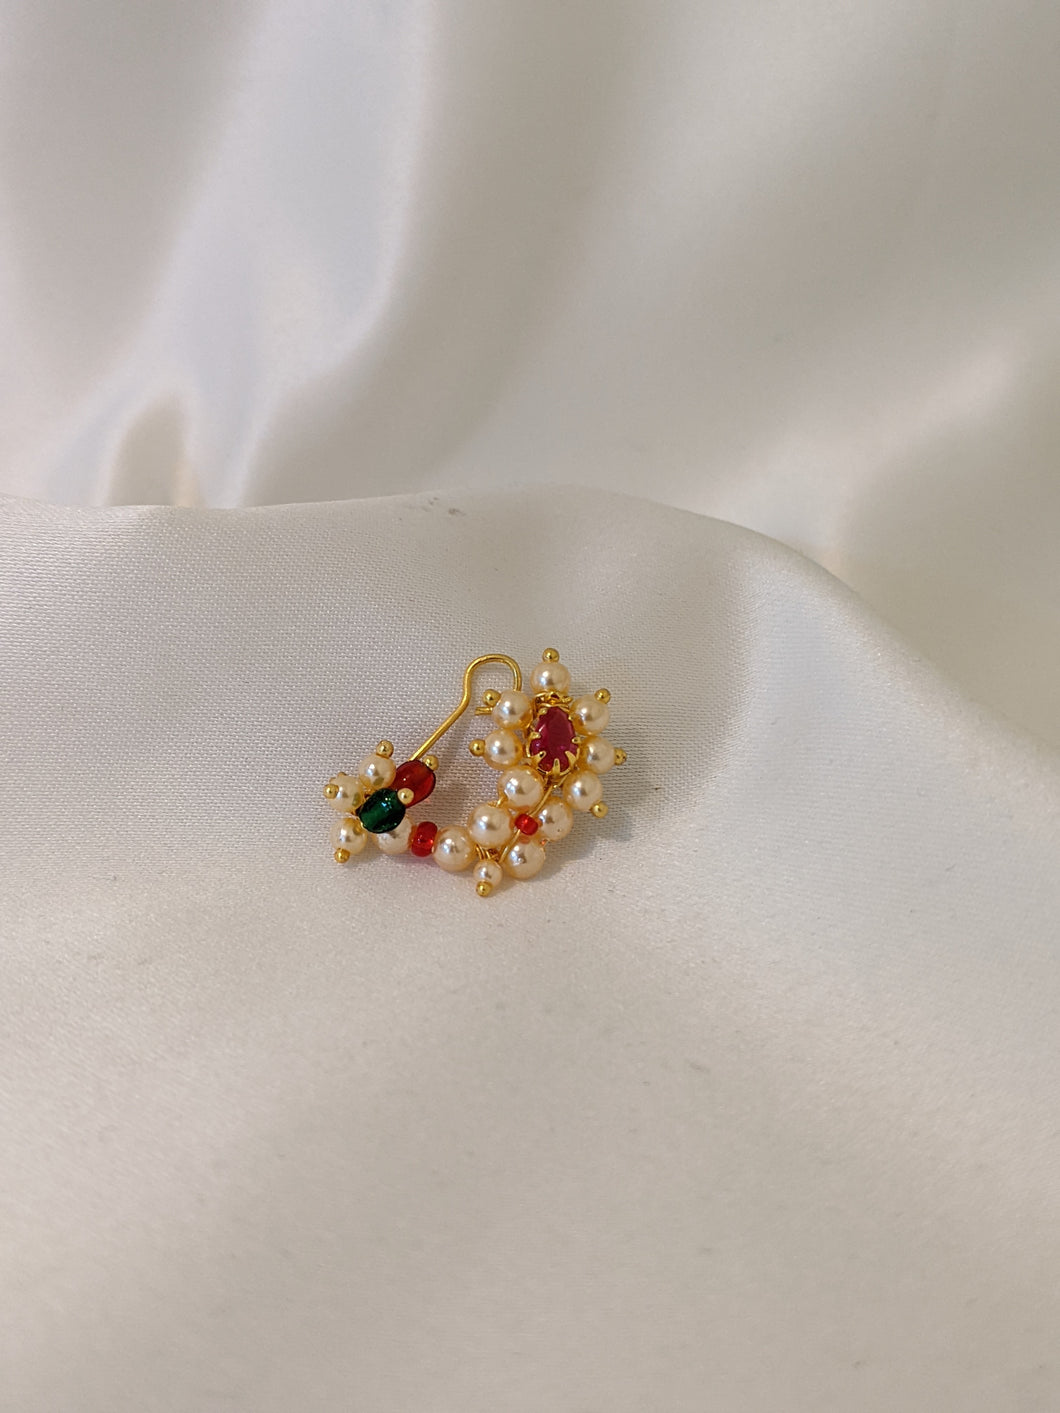 Maharashtrian Nose Stud Indian Non Pierced Nath Ethnic Pearl Nose Ring  Jewelry | eBay